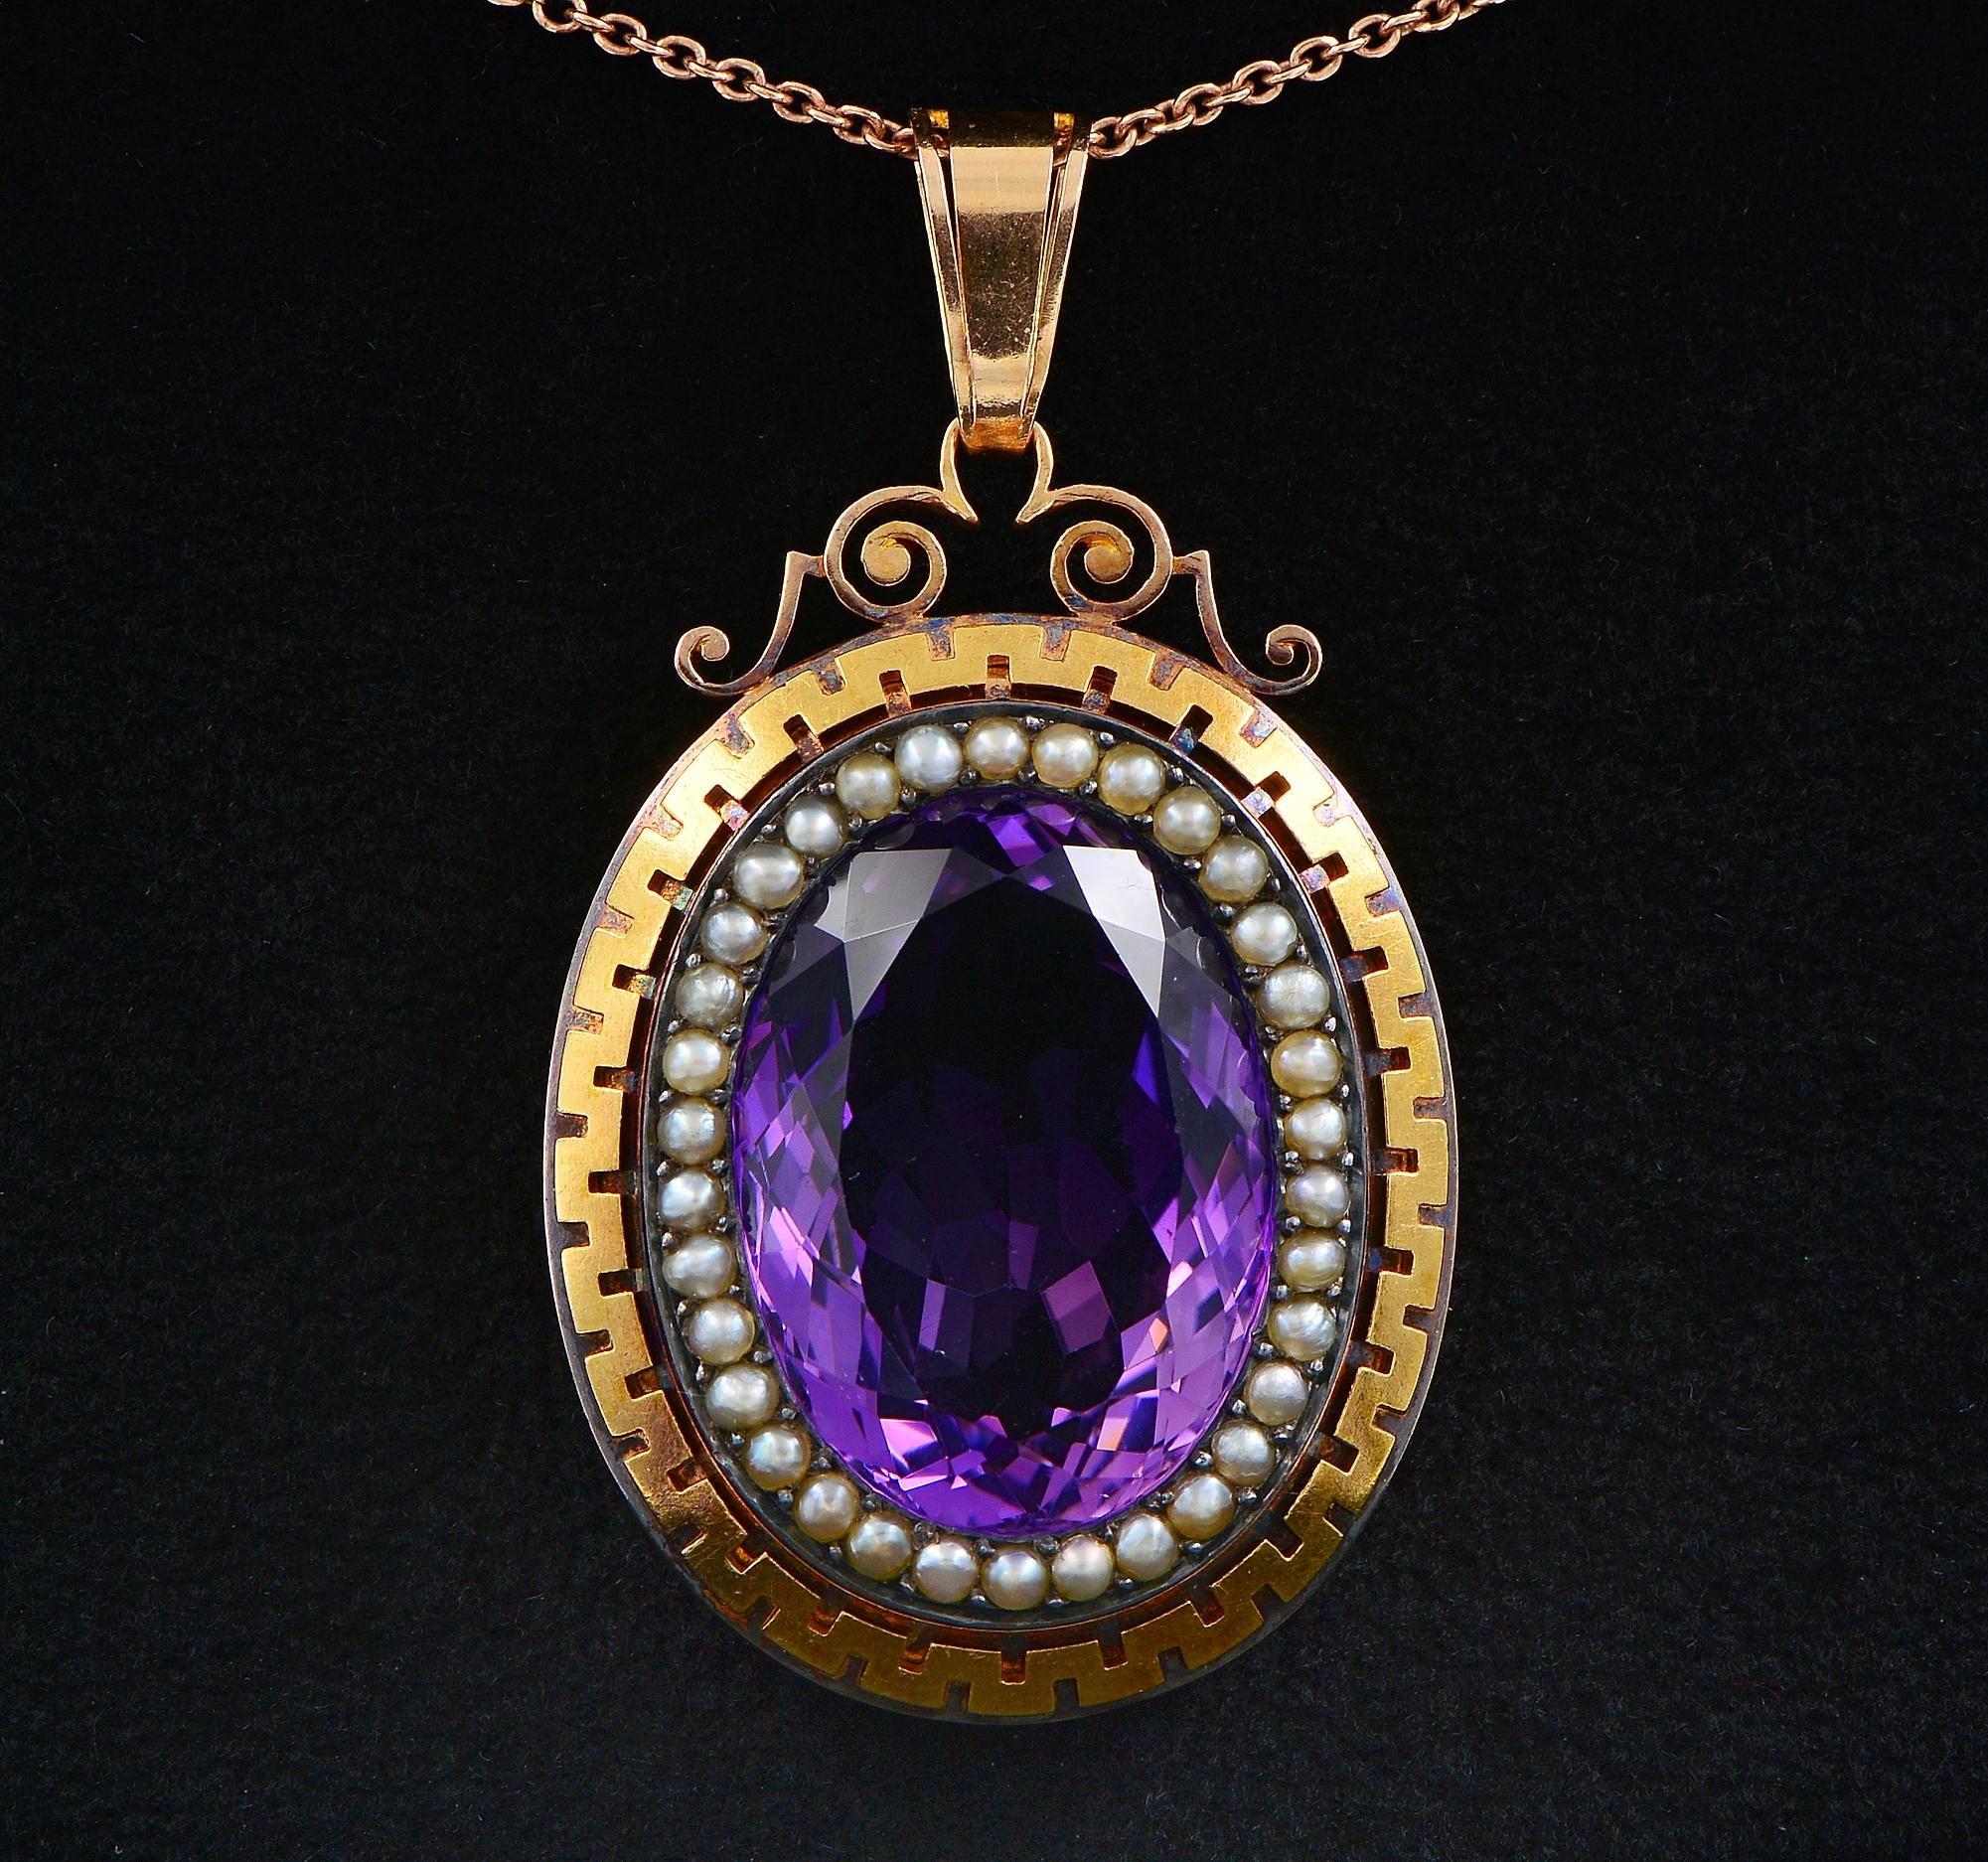 Victoriana
Large and amazingly hand crafted Amethyst pendant dating 1860/70 ca
The heavy made mount its a beauty its own, weighs 21.8 grams , solid 18 Kt gold with thin silver line hosting the micro pearls, pendant is bordered with fine pierce work